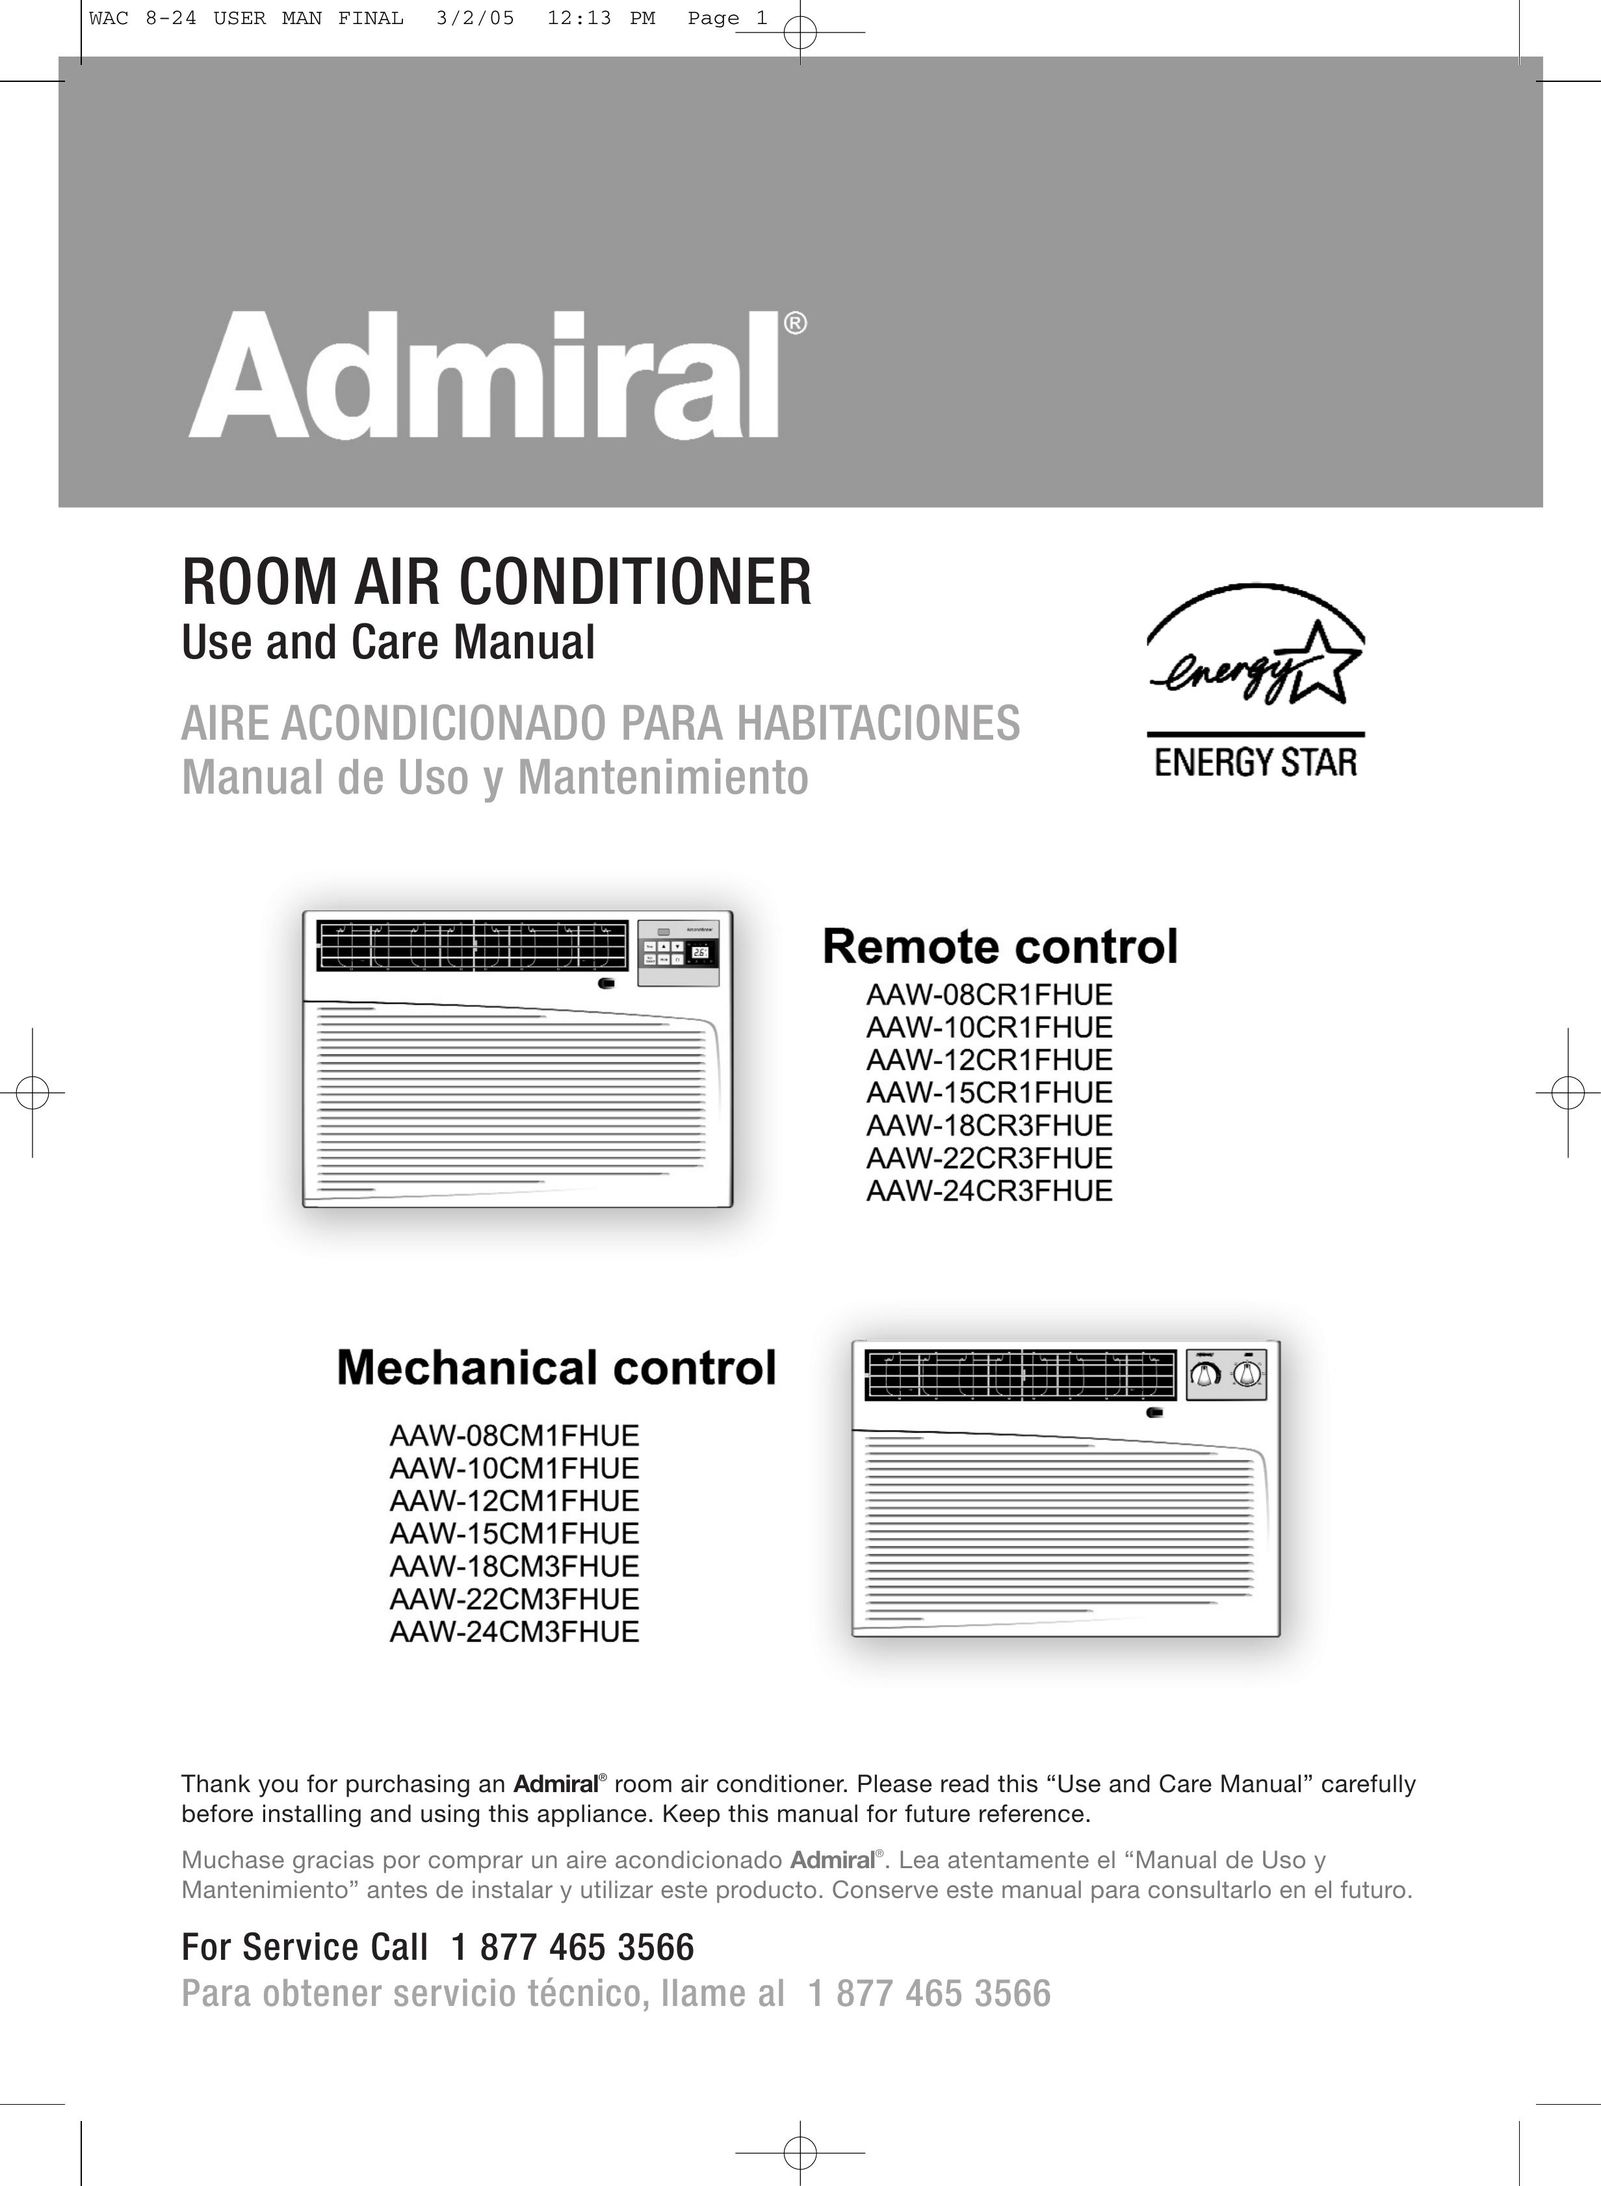 Admiral AAW-12CR1FHUE Air Conditioner User Manual